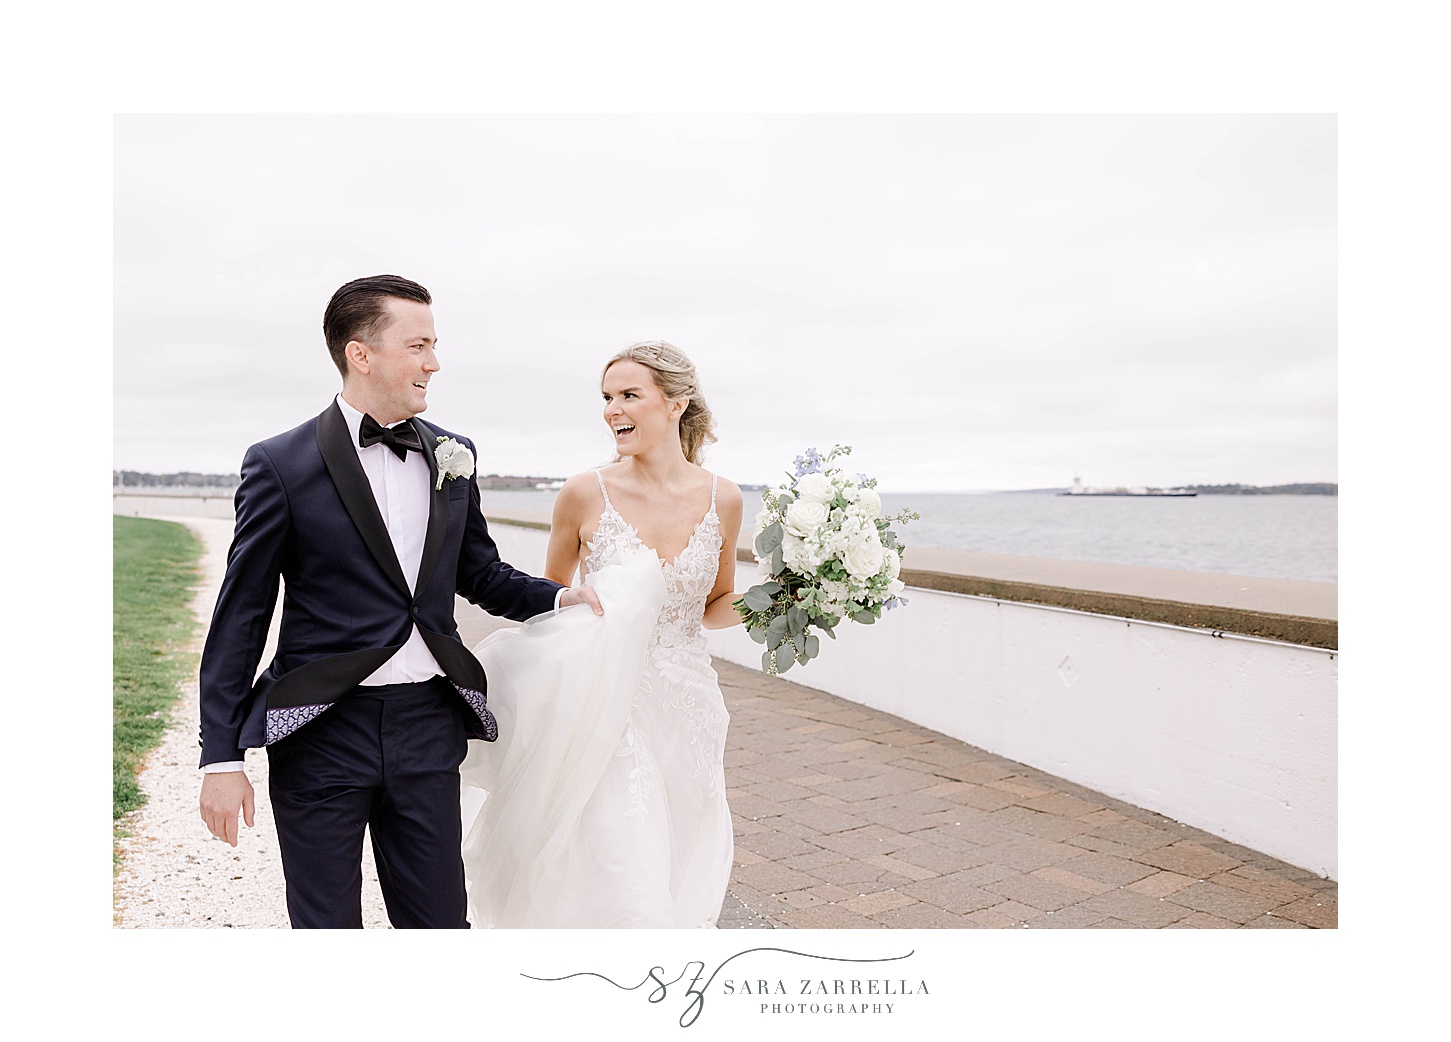 newlyweds laugh walking together on windy day in Newport RI